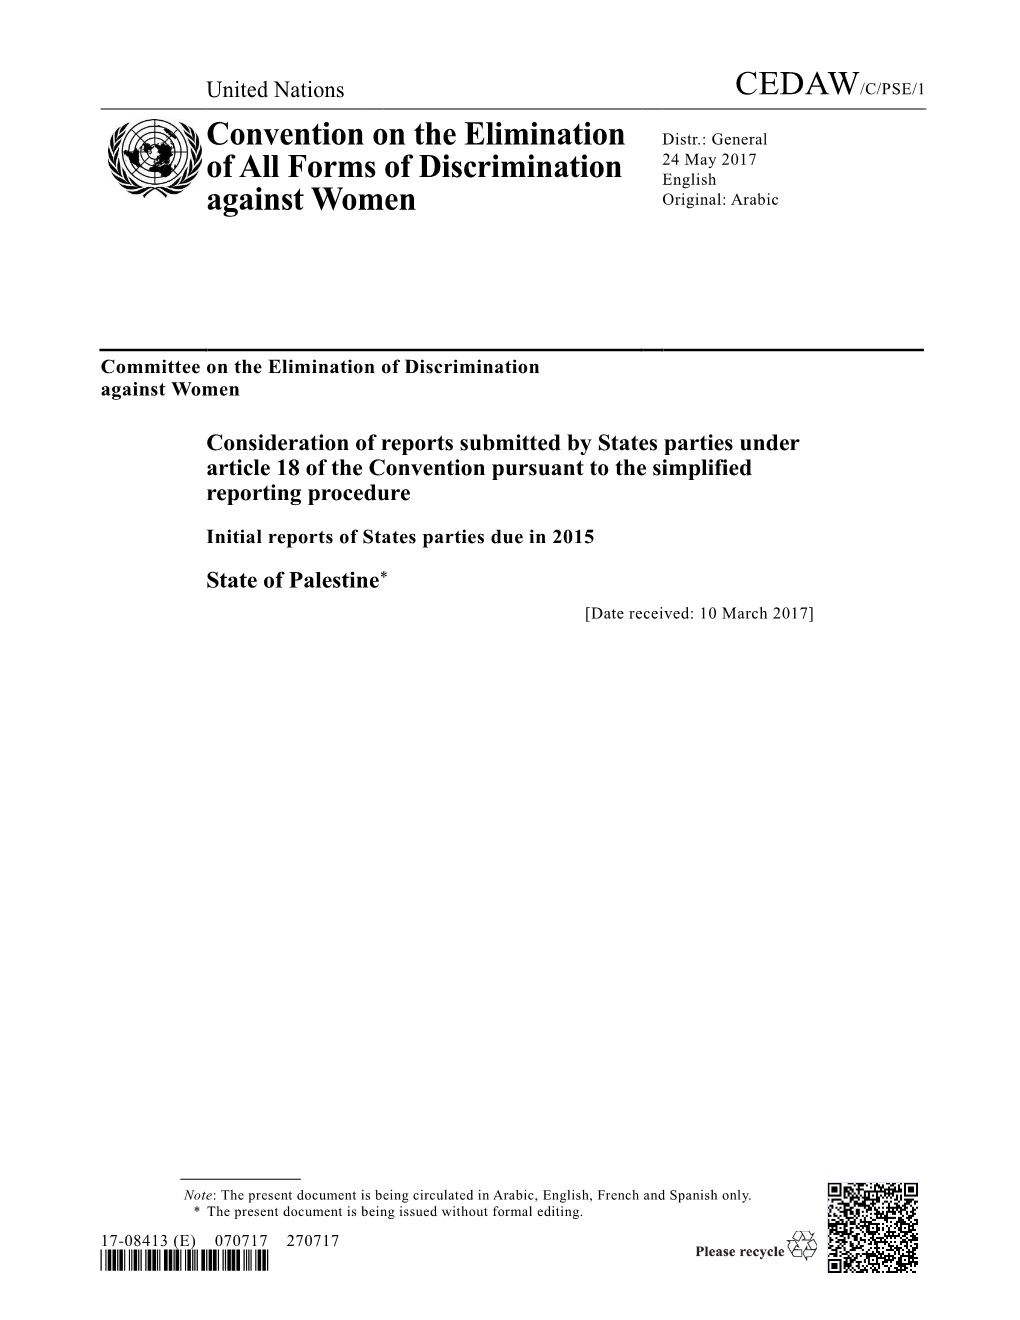 Convention on the Elimination of All Forms of Discrimination Against Women on 1 April 2014, Without Submitting Reservations to Any of Its Articles